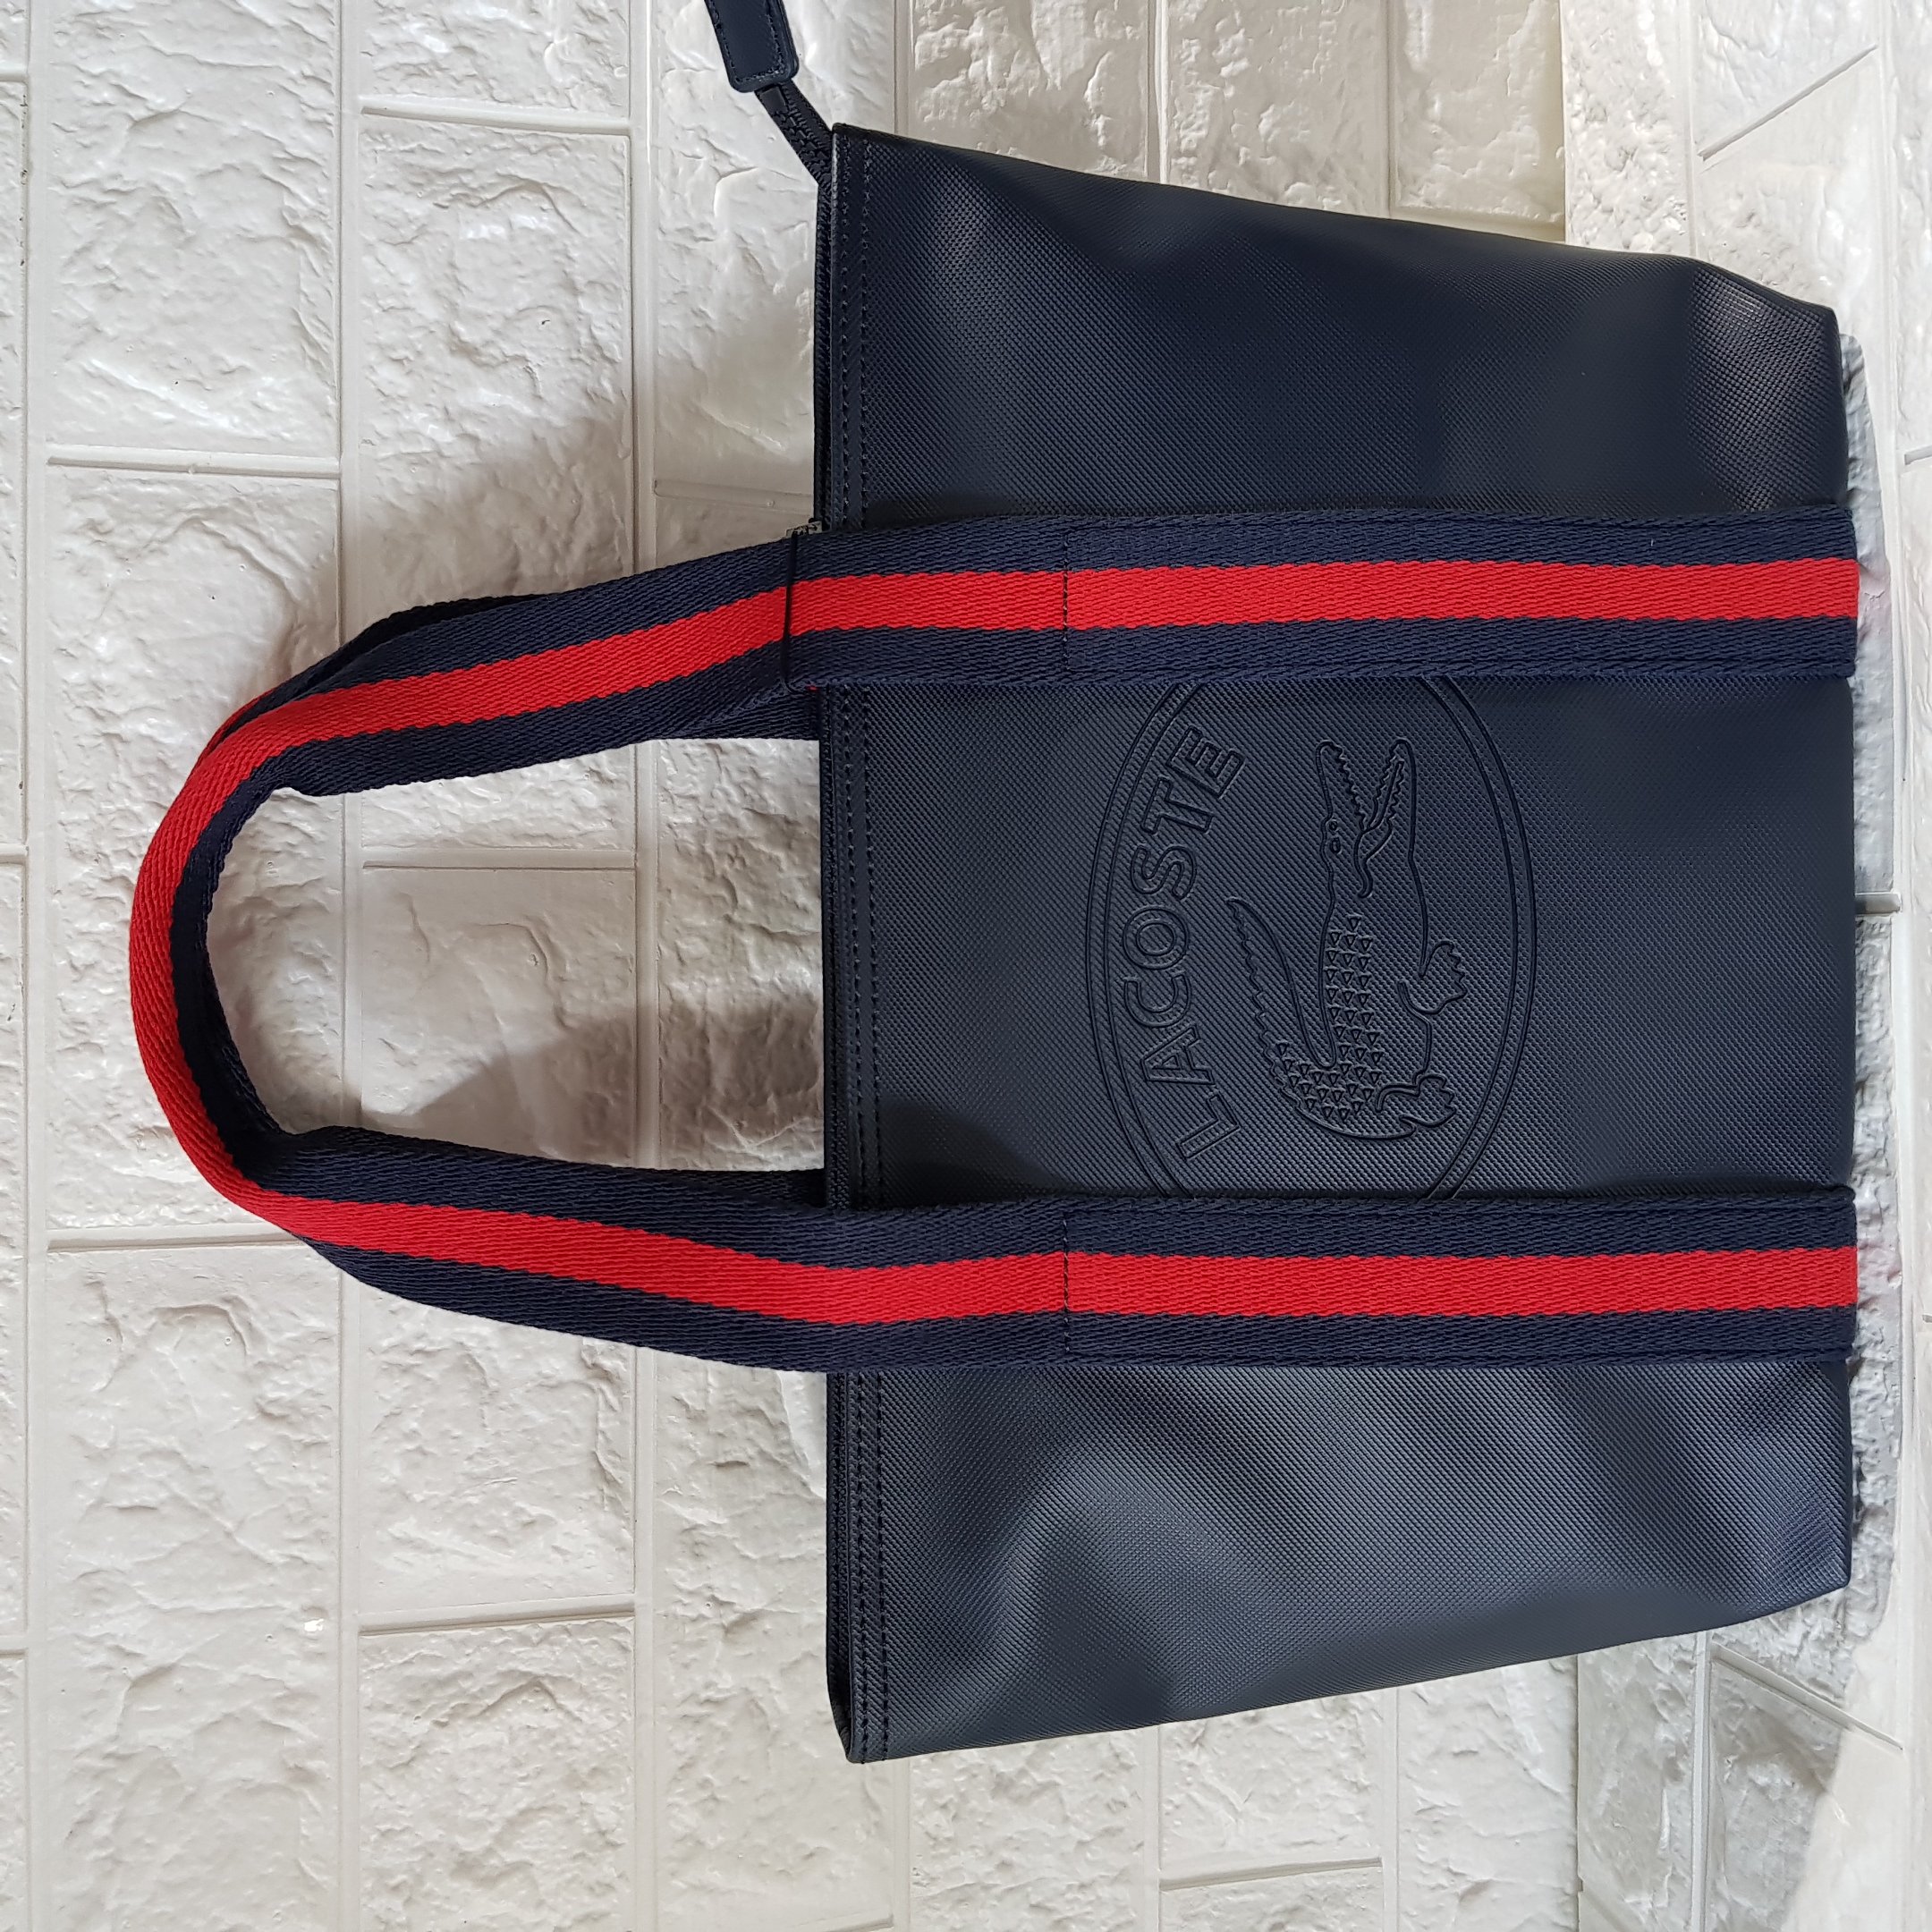 lacoste tote bag navy blue